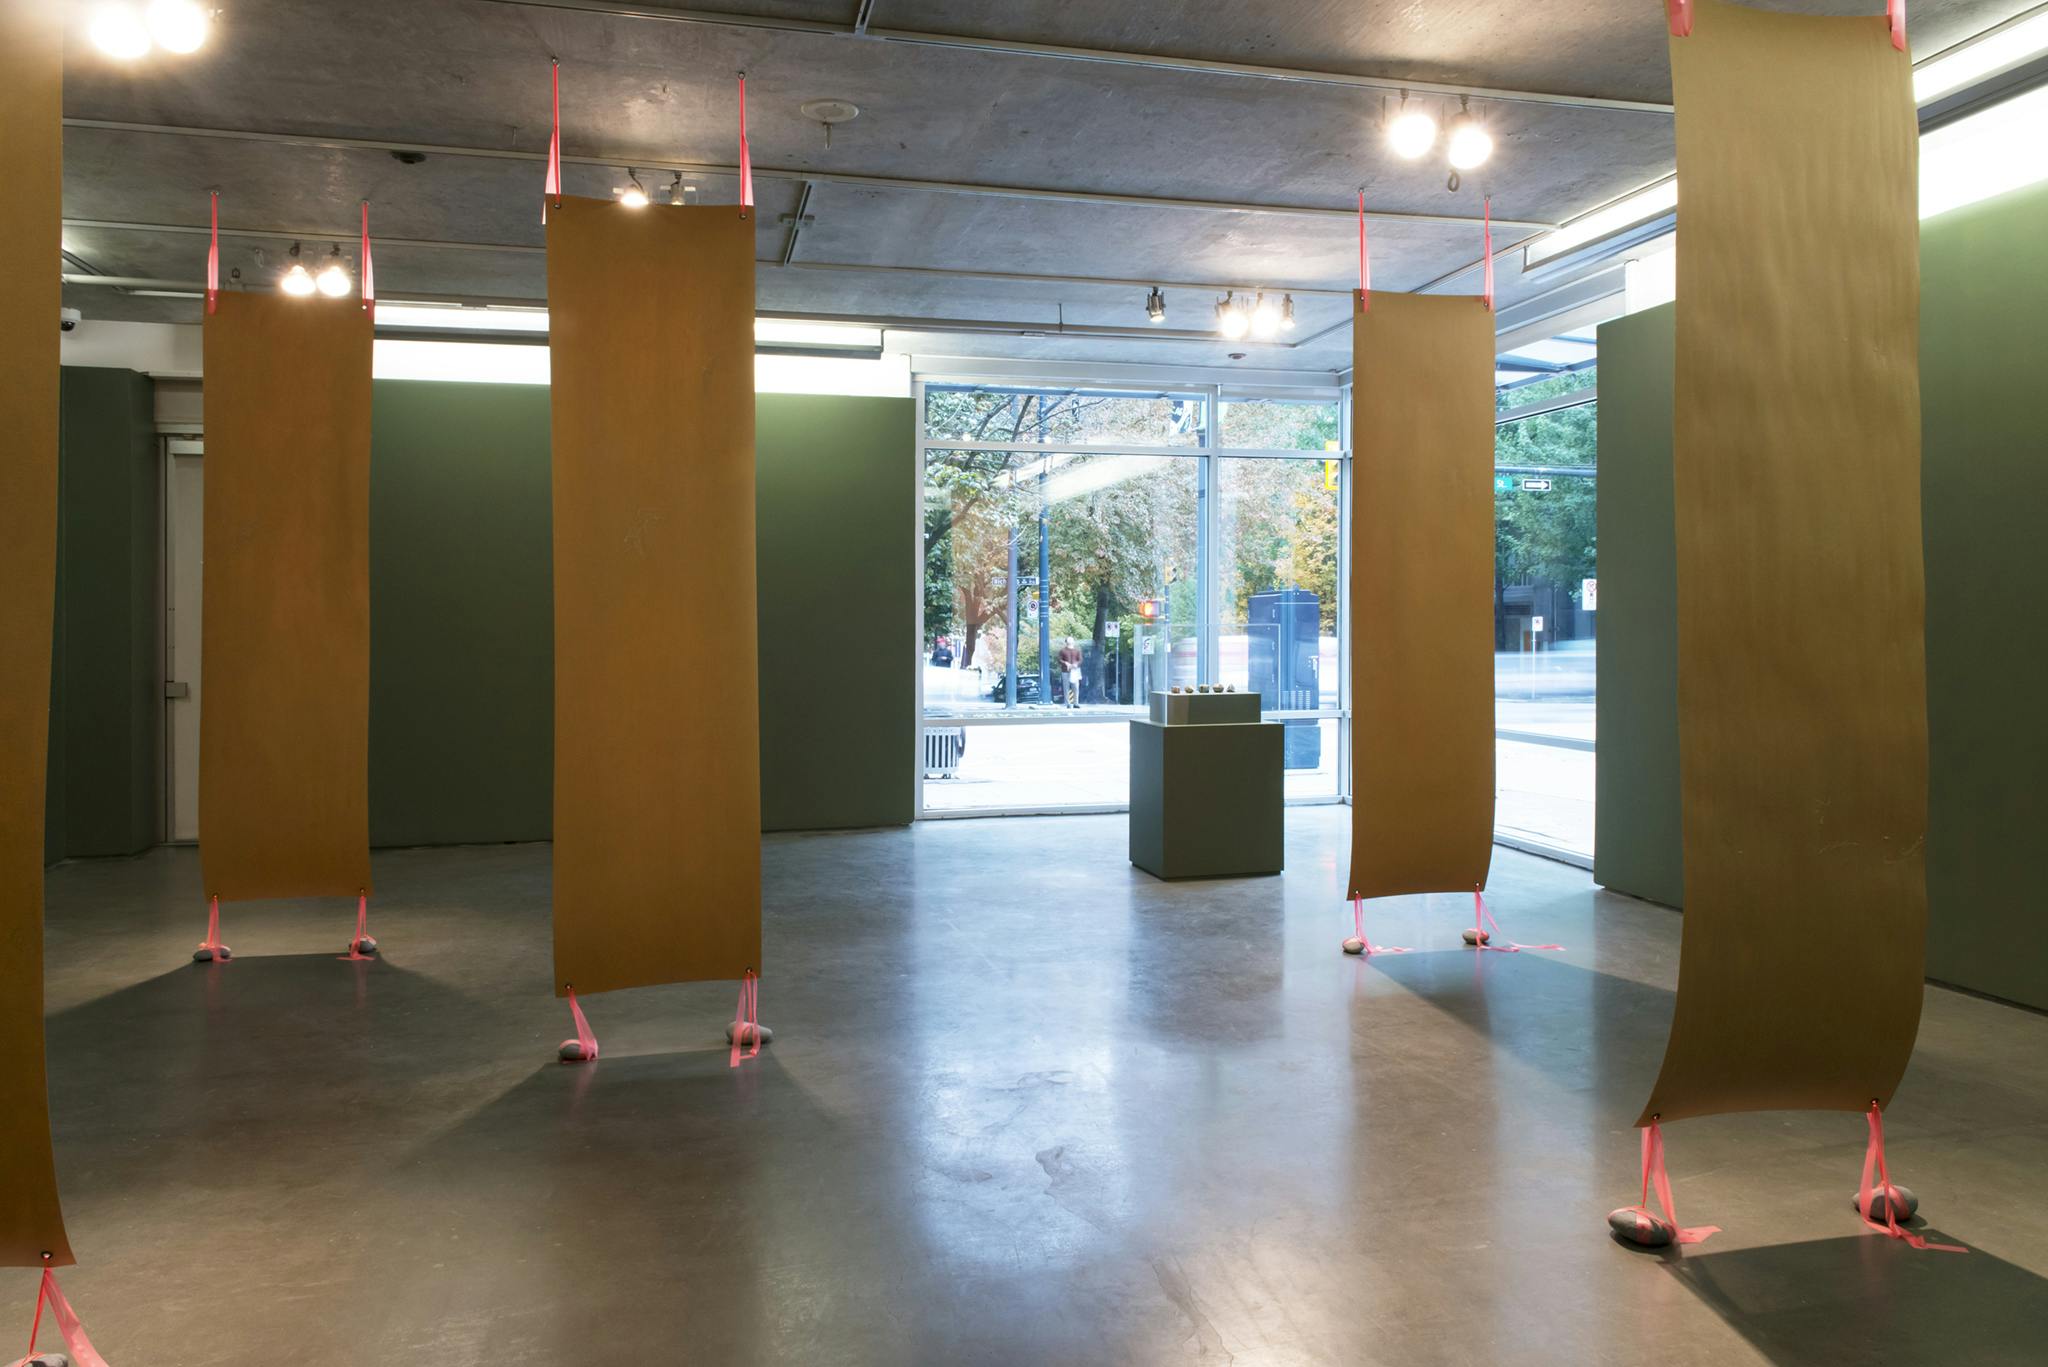 Installation shot of five panels of veneer stretched vertically from the gallery floor to ceiling. A green vitrine sits in the background, placed in front of a large corner window.